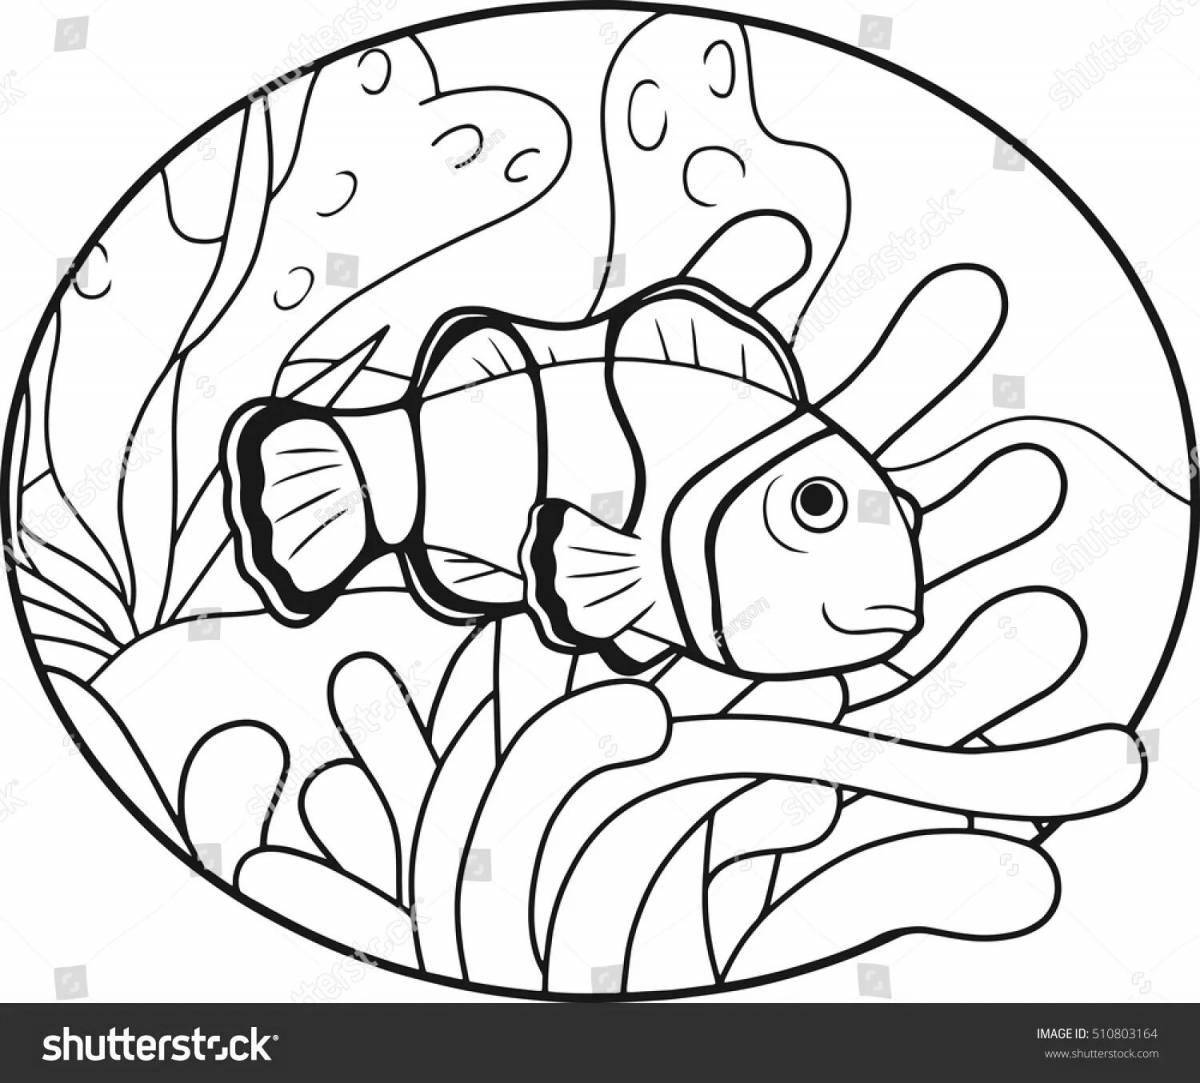 Colorful clown fish coloring page